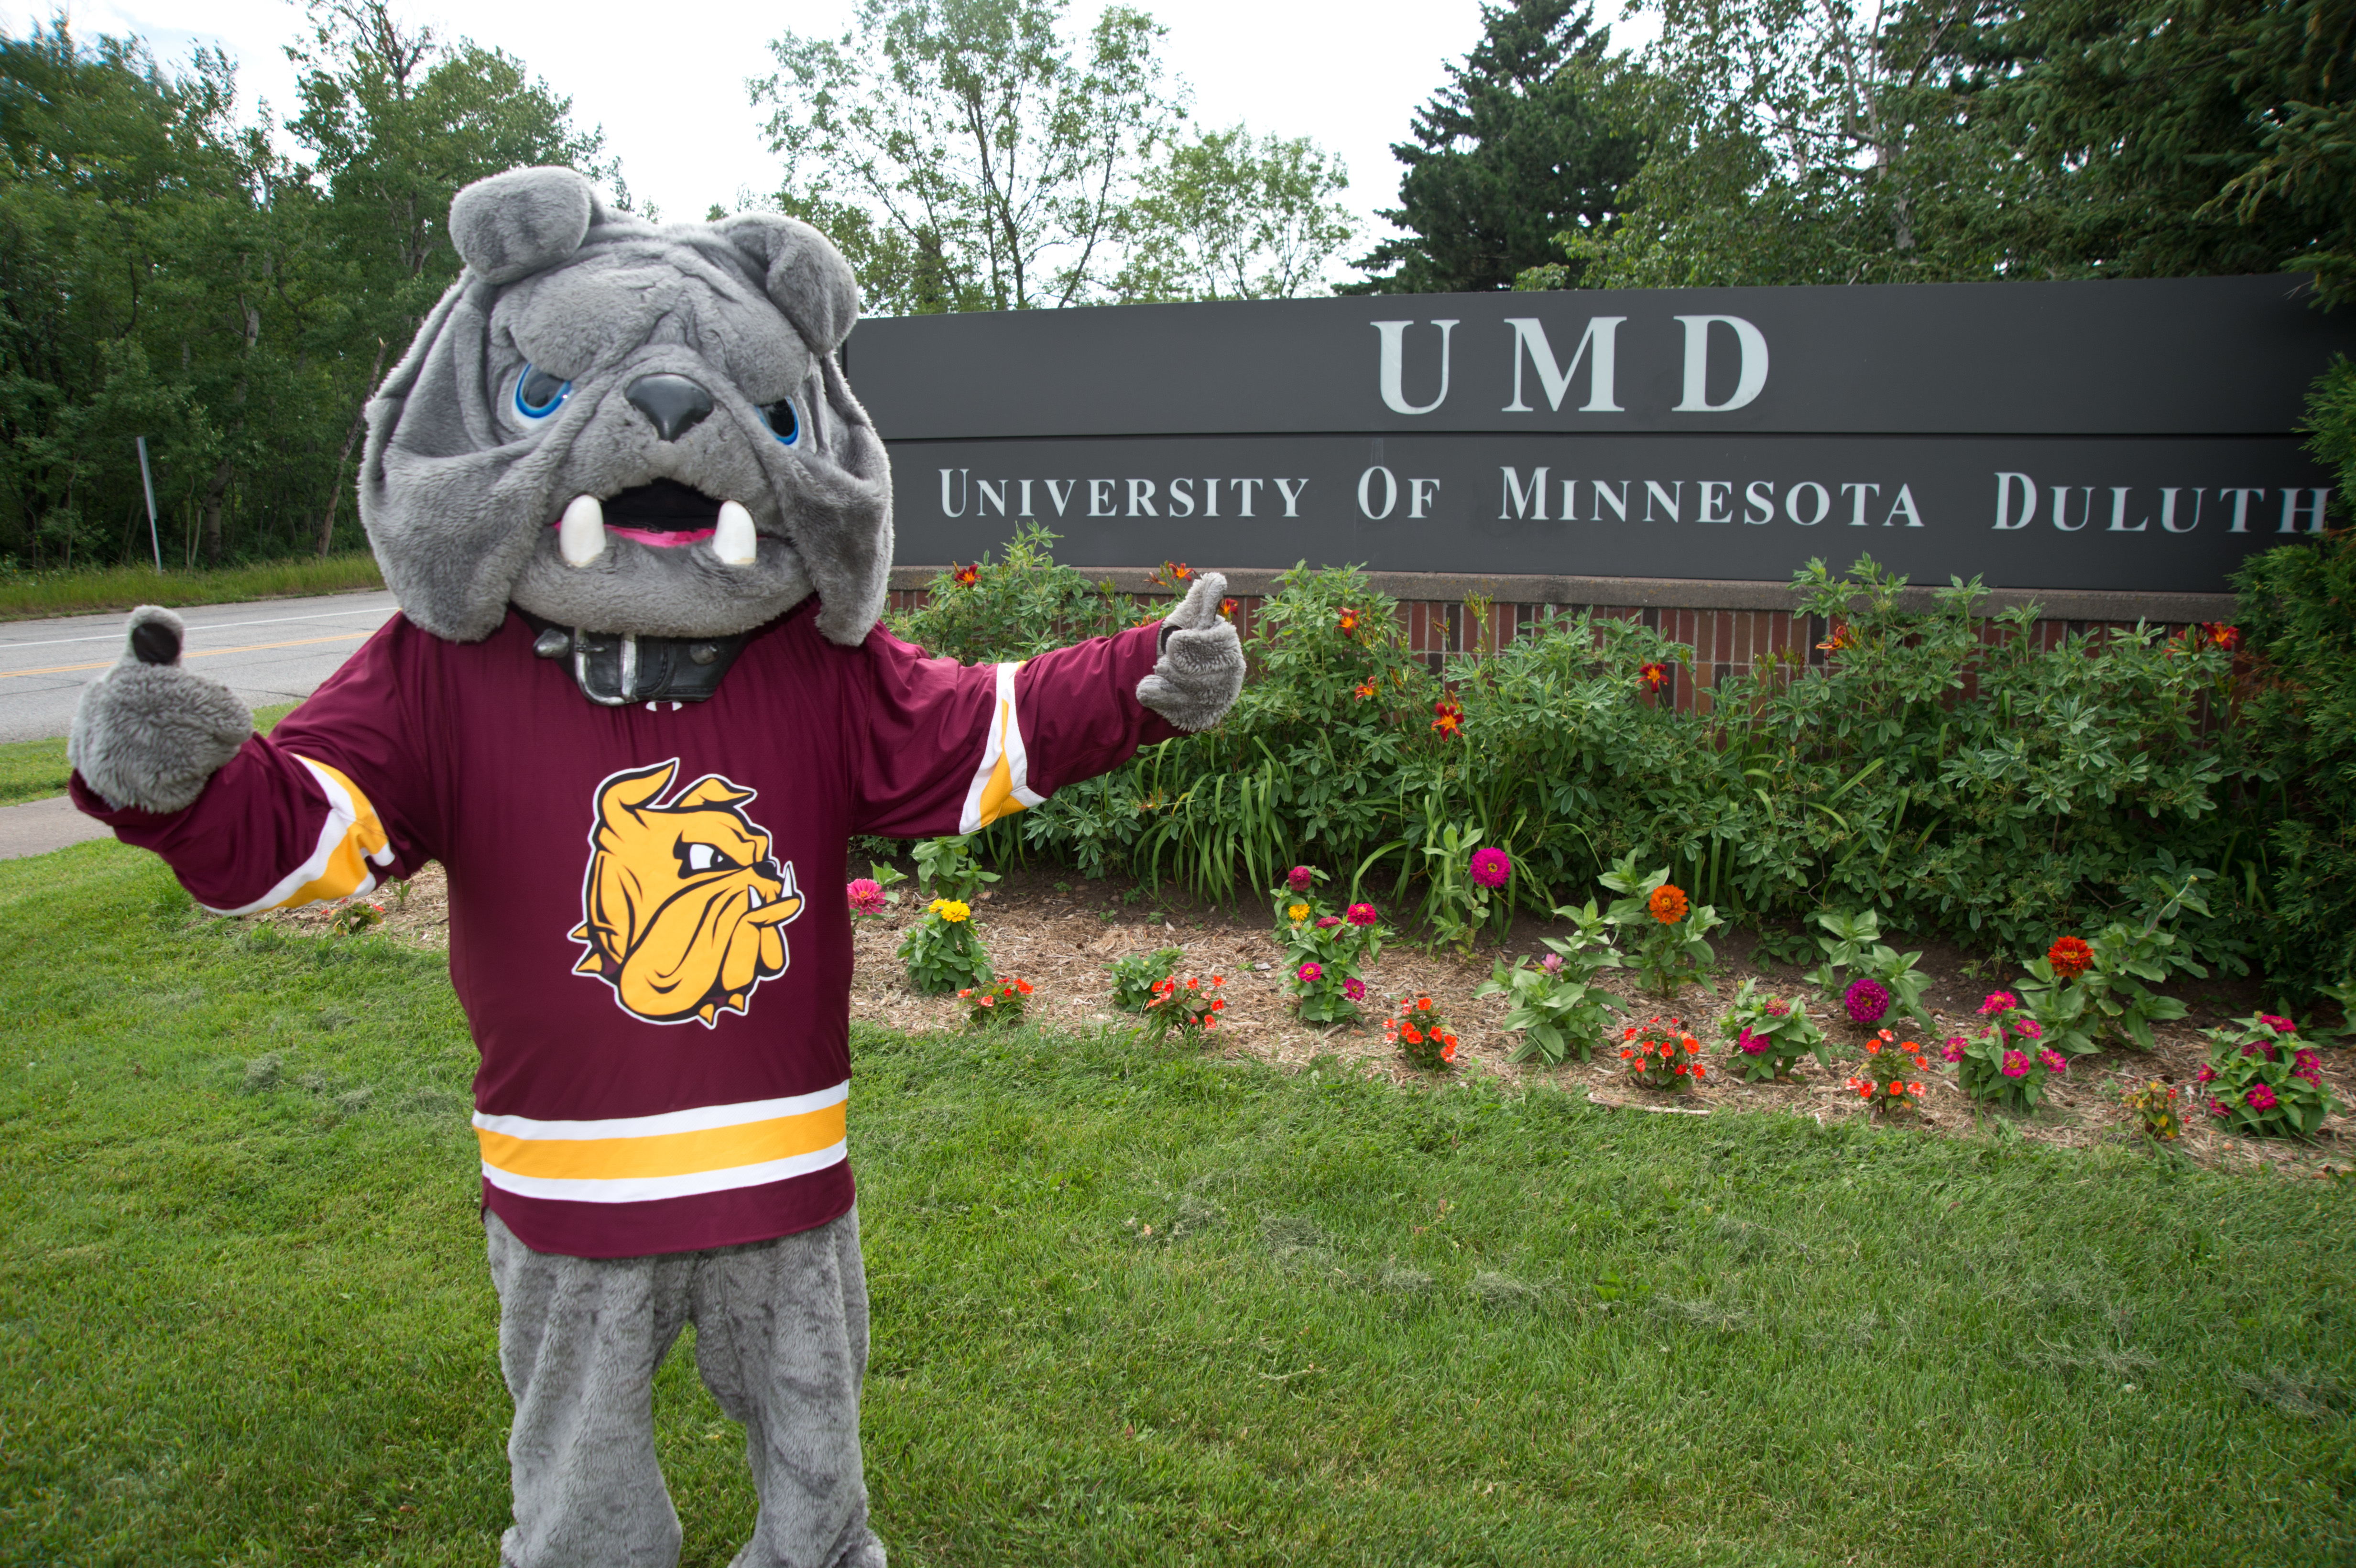 Champ the Bulldog mascot posing in front the UMD sign